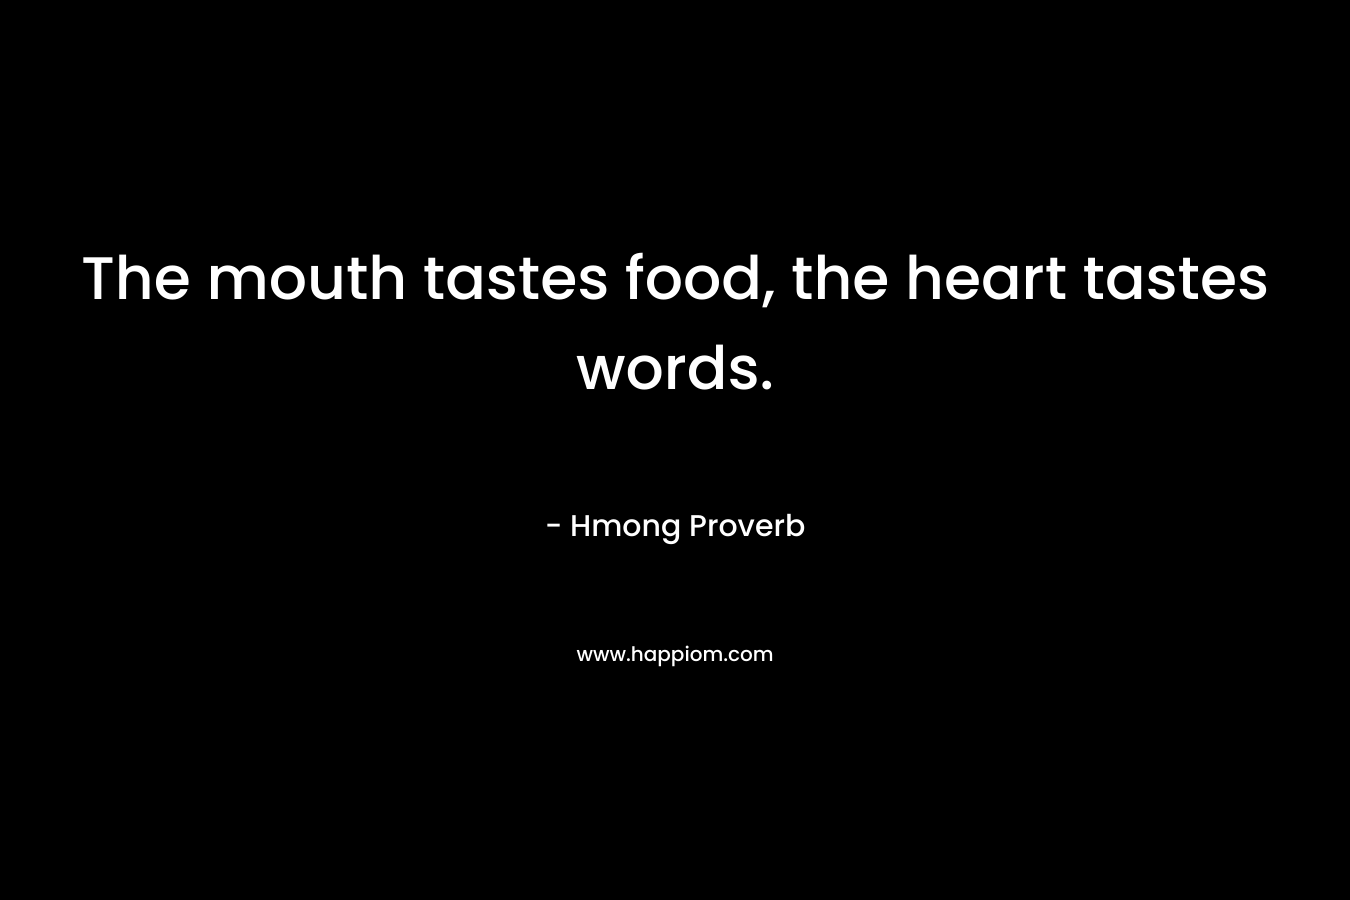 The mouth tastes food, the heart tastes words.